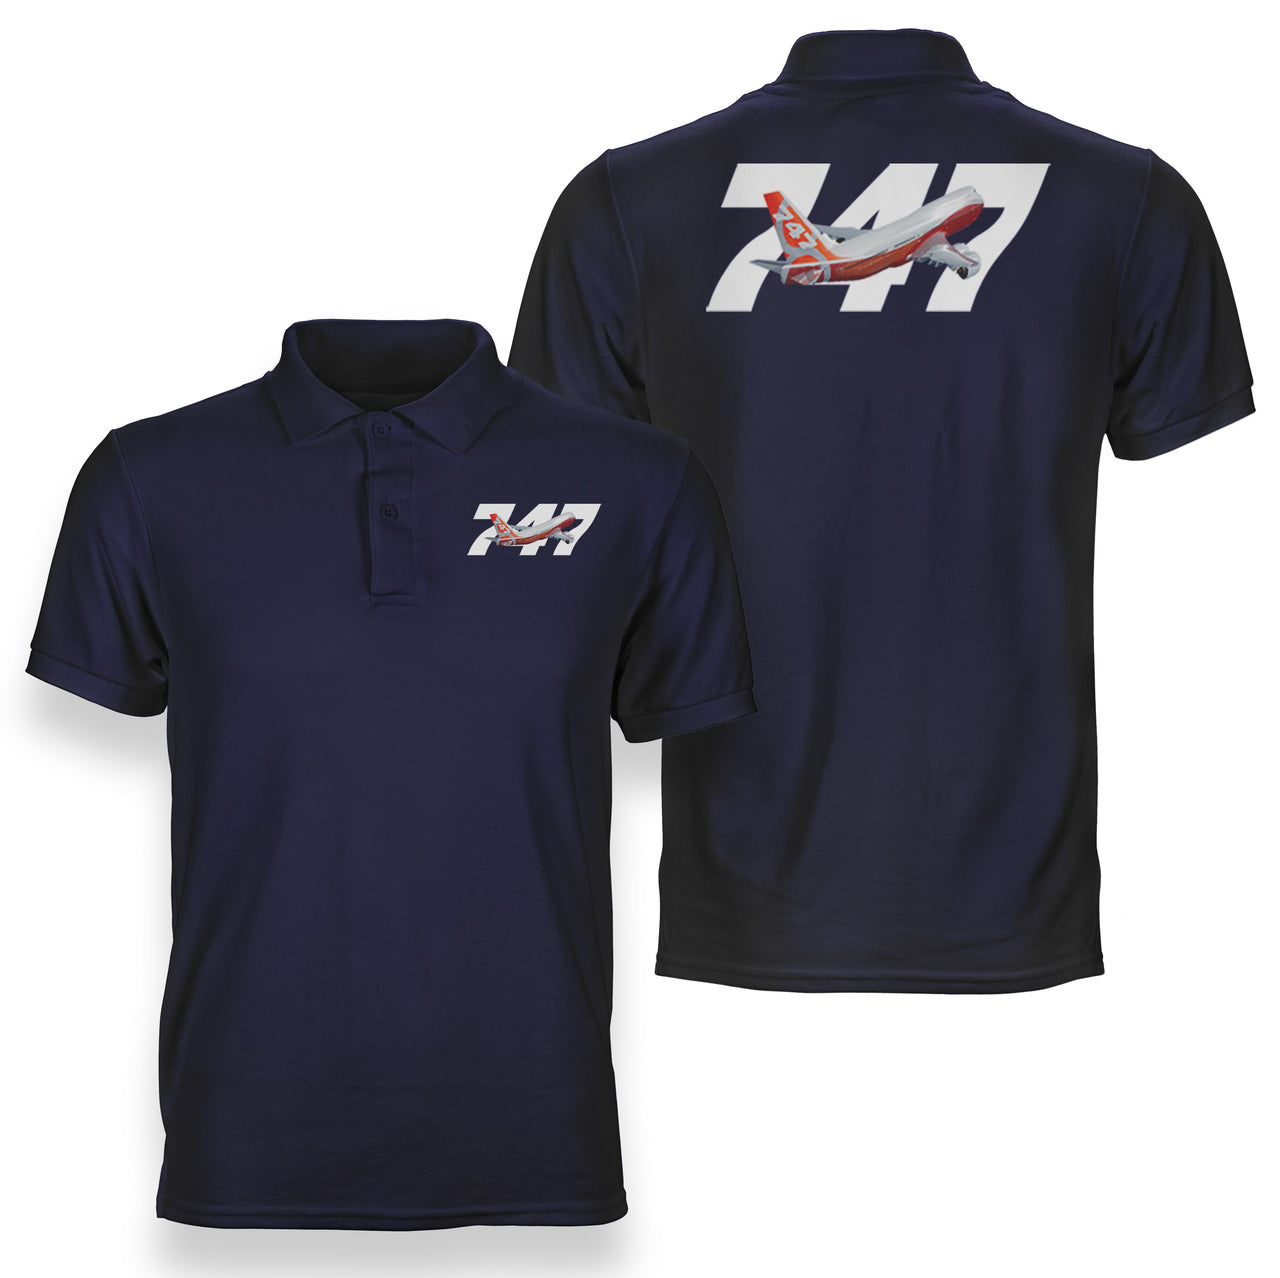 Super Boeing 747 Intercontinental Designed Double Side Polo T-Shirts